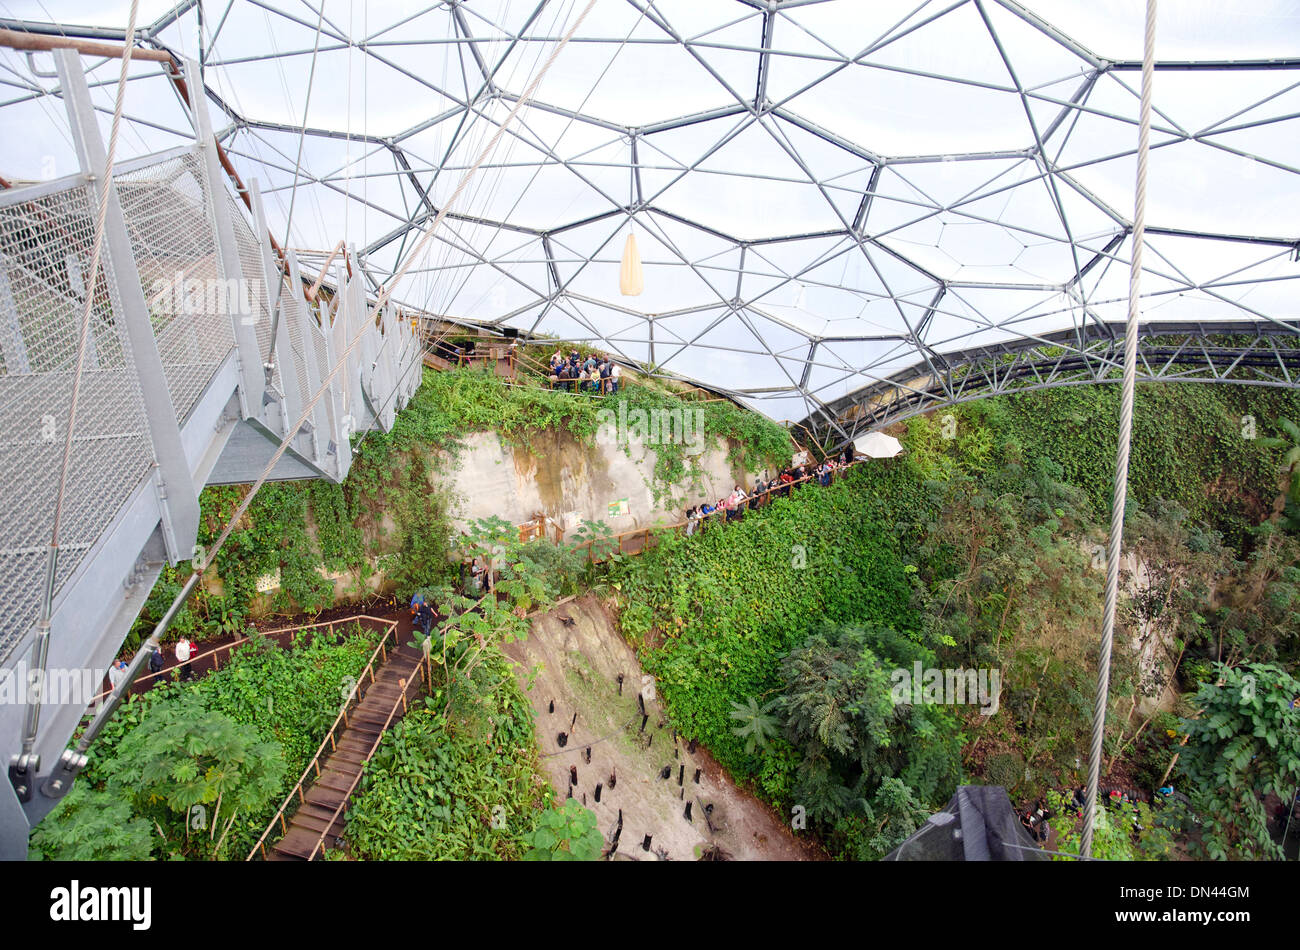 A birds eye view from the high-level viewing platform inside the Tropical Biome at the Eden Project in Cornwall, UK Stock Photo